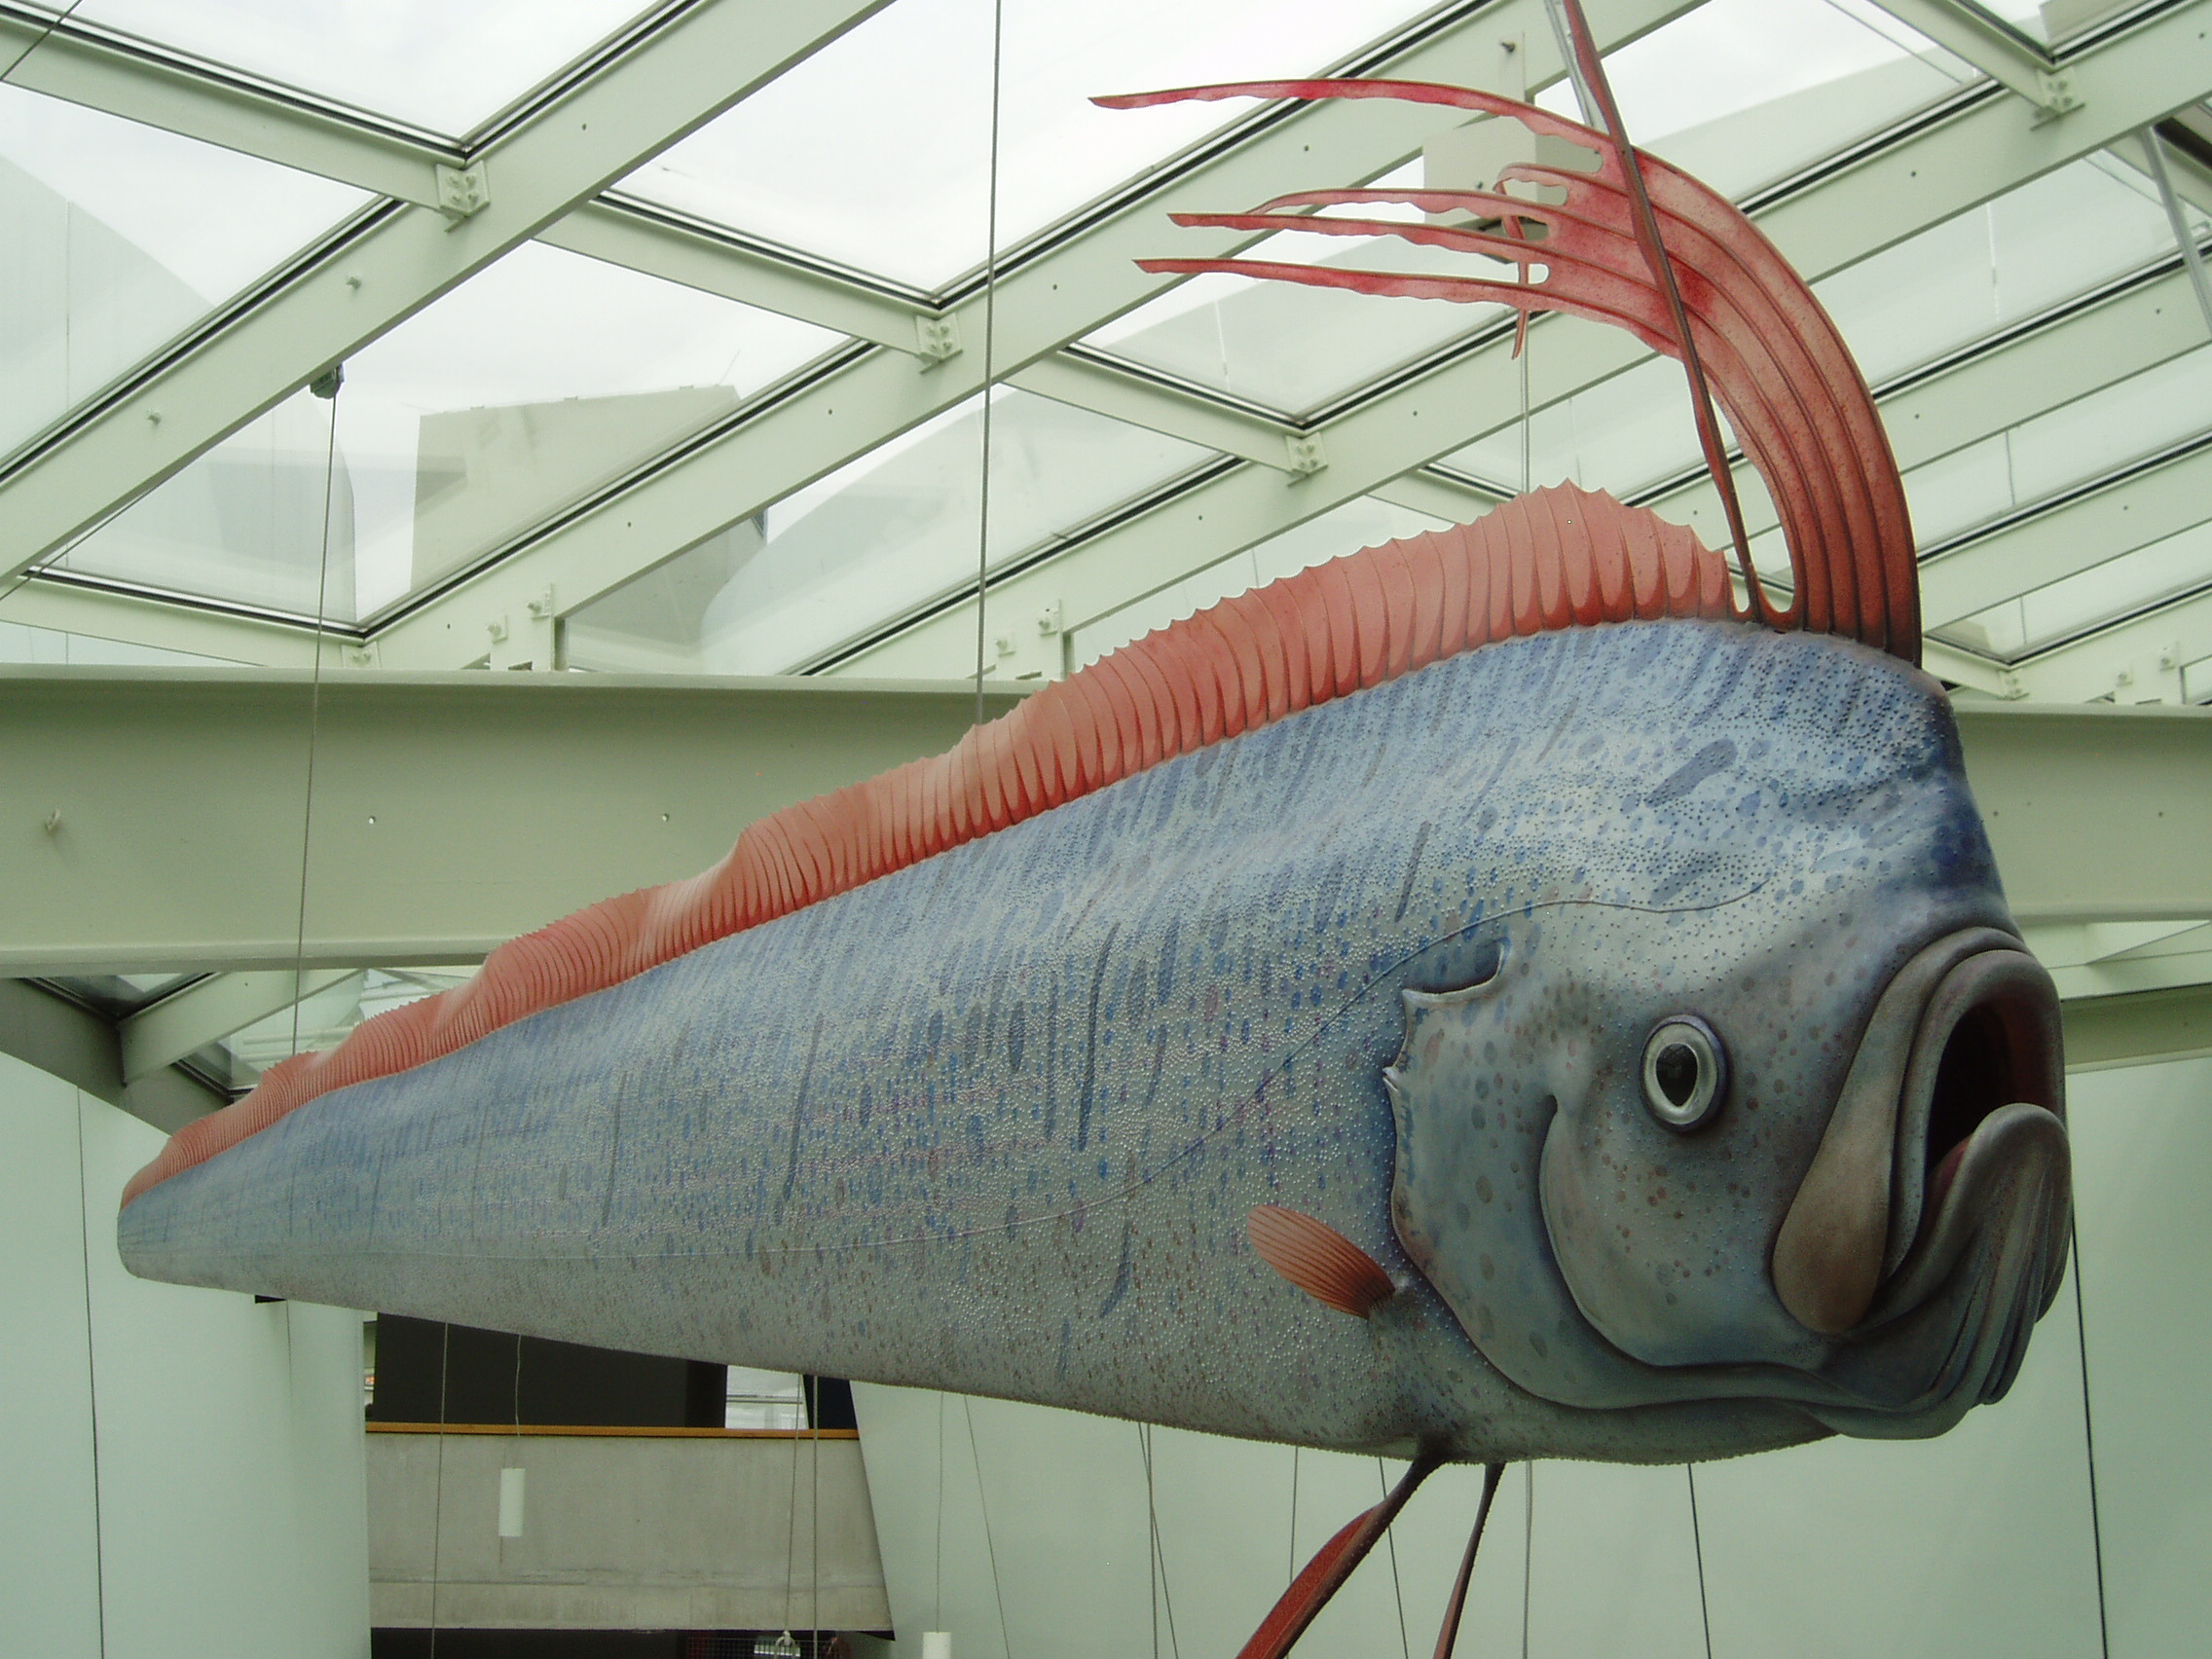 Oarfish as a precursor to natural disasters: Myth or fact?